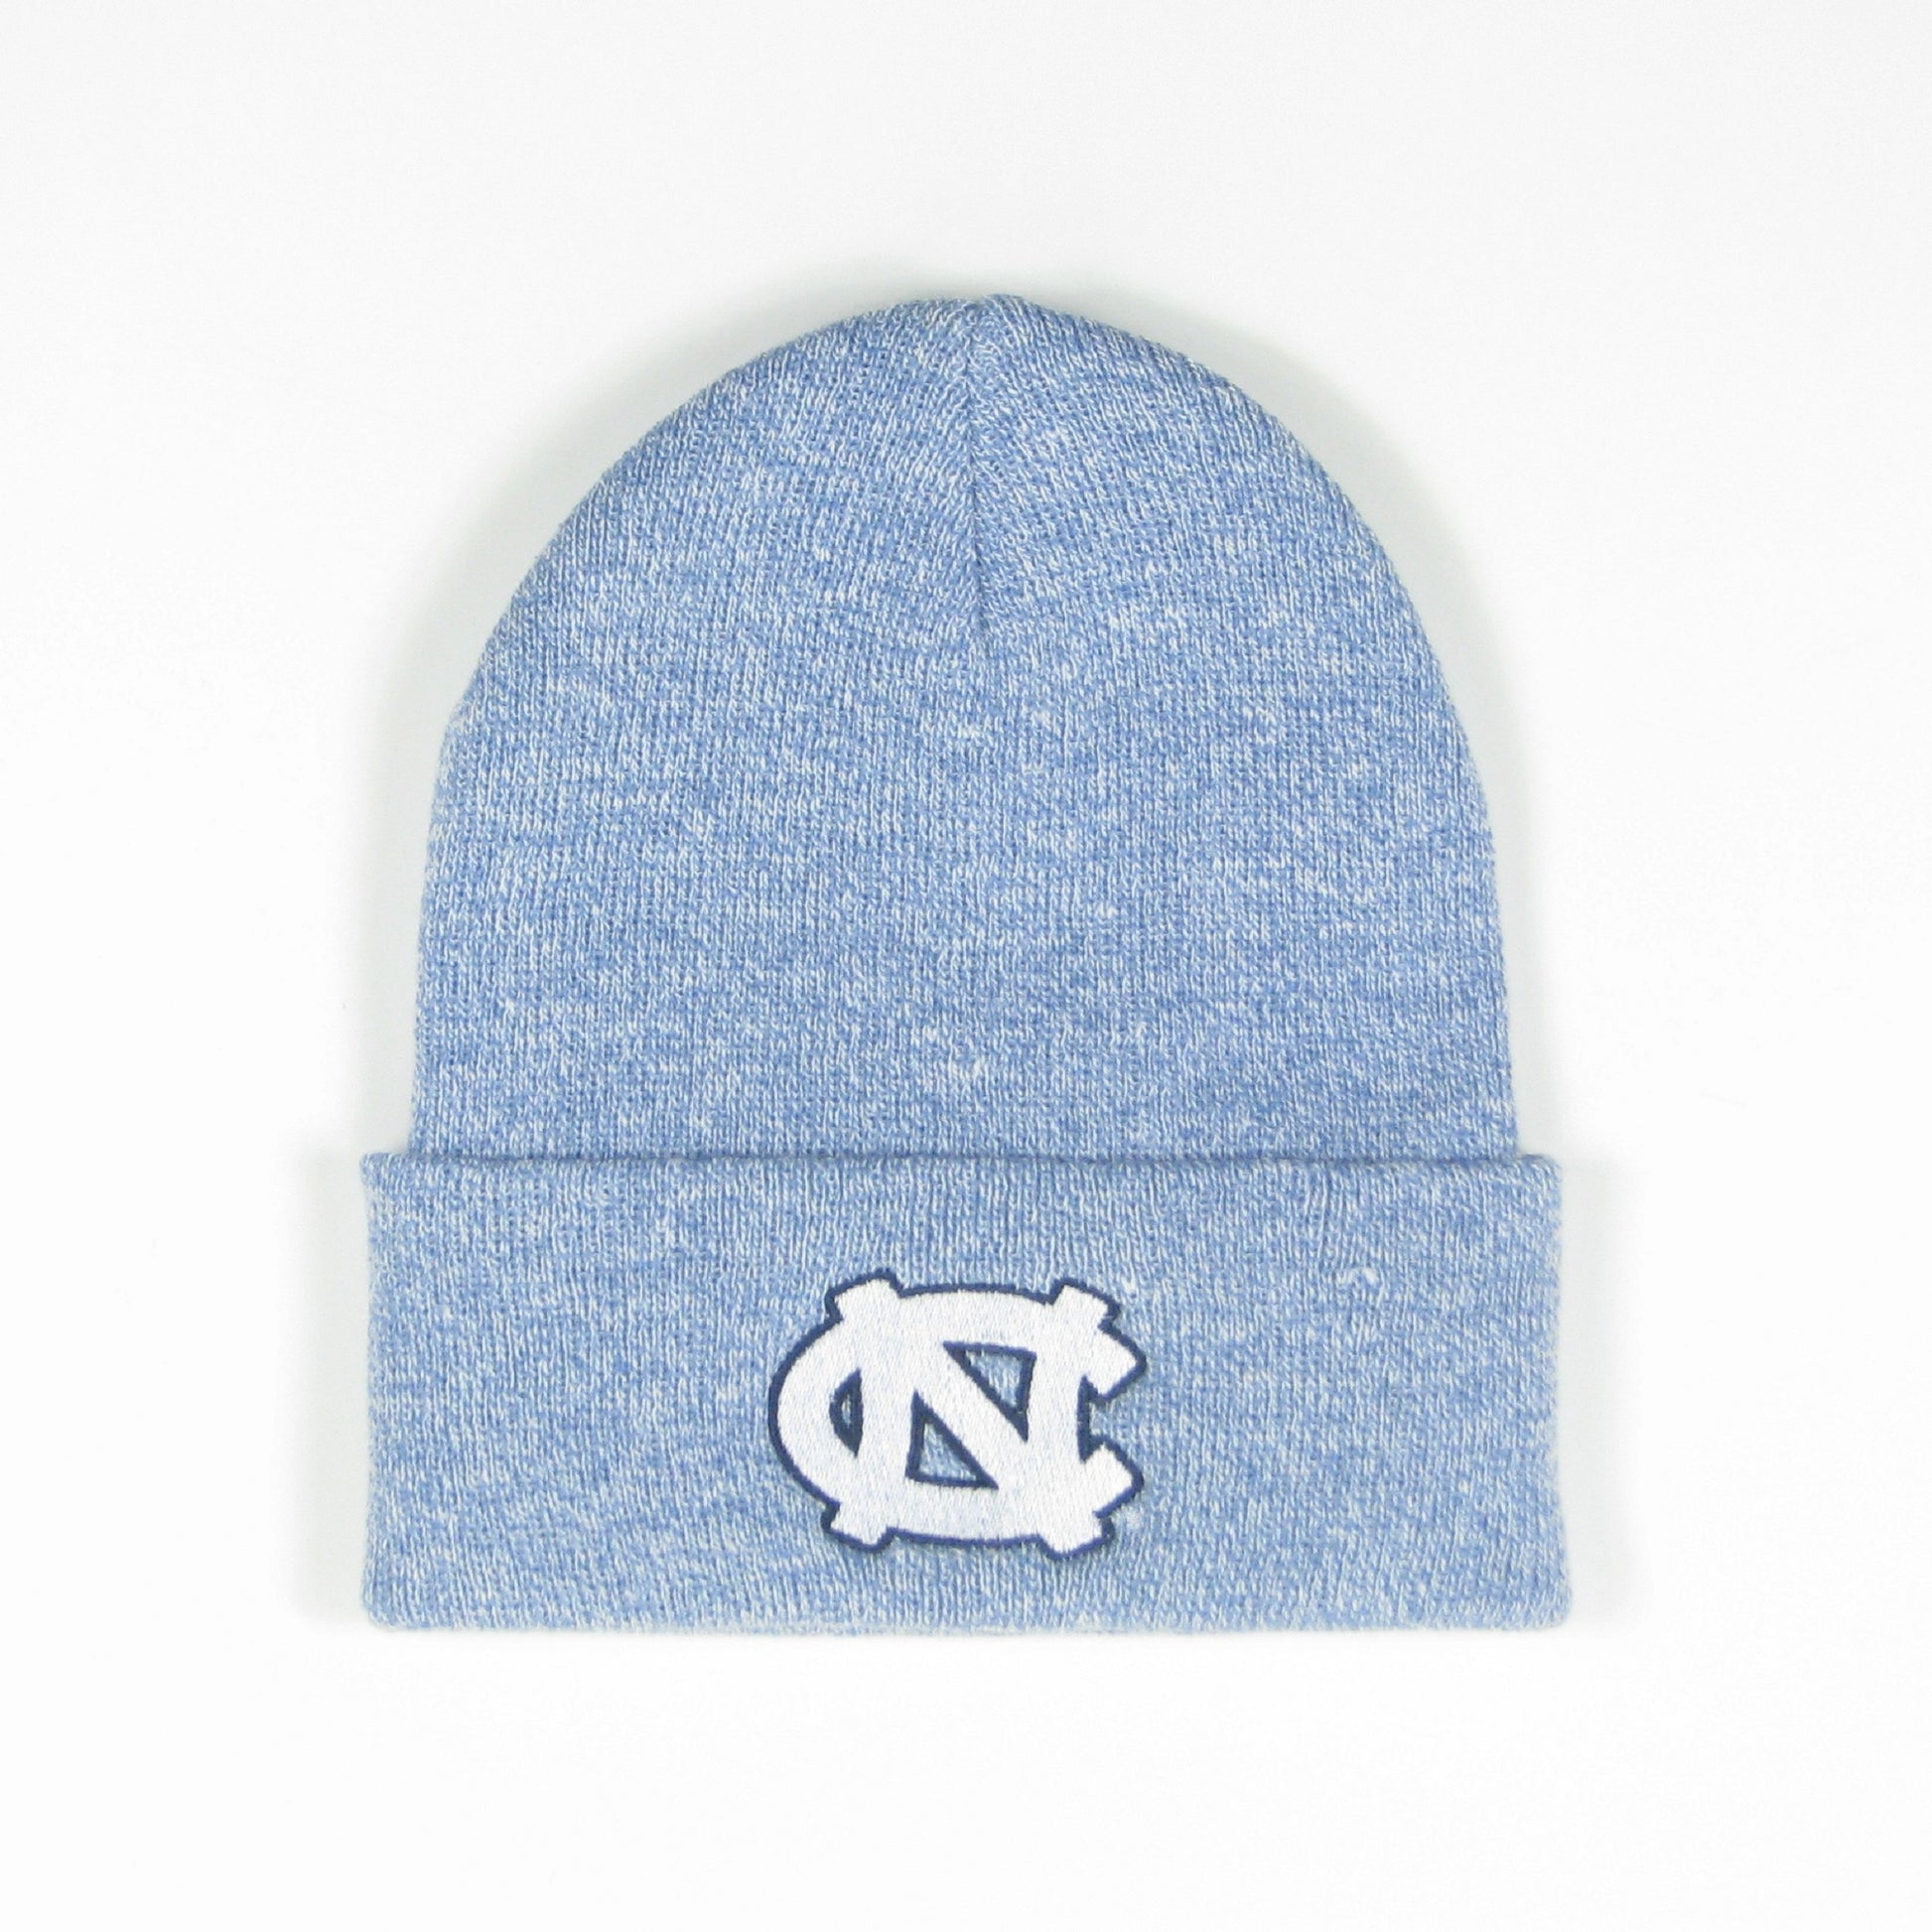 Carolina Blue Cuffed Unisex Beanie with UNC Logo in White Embroidered 